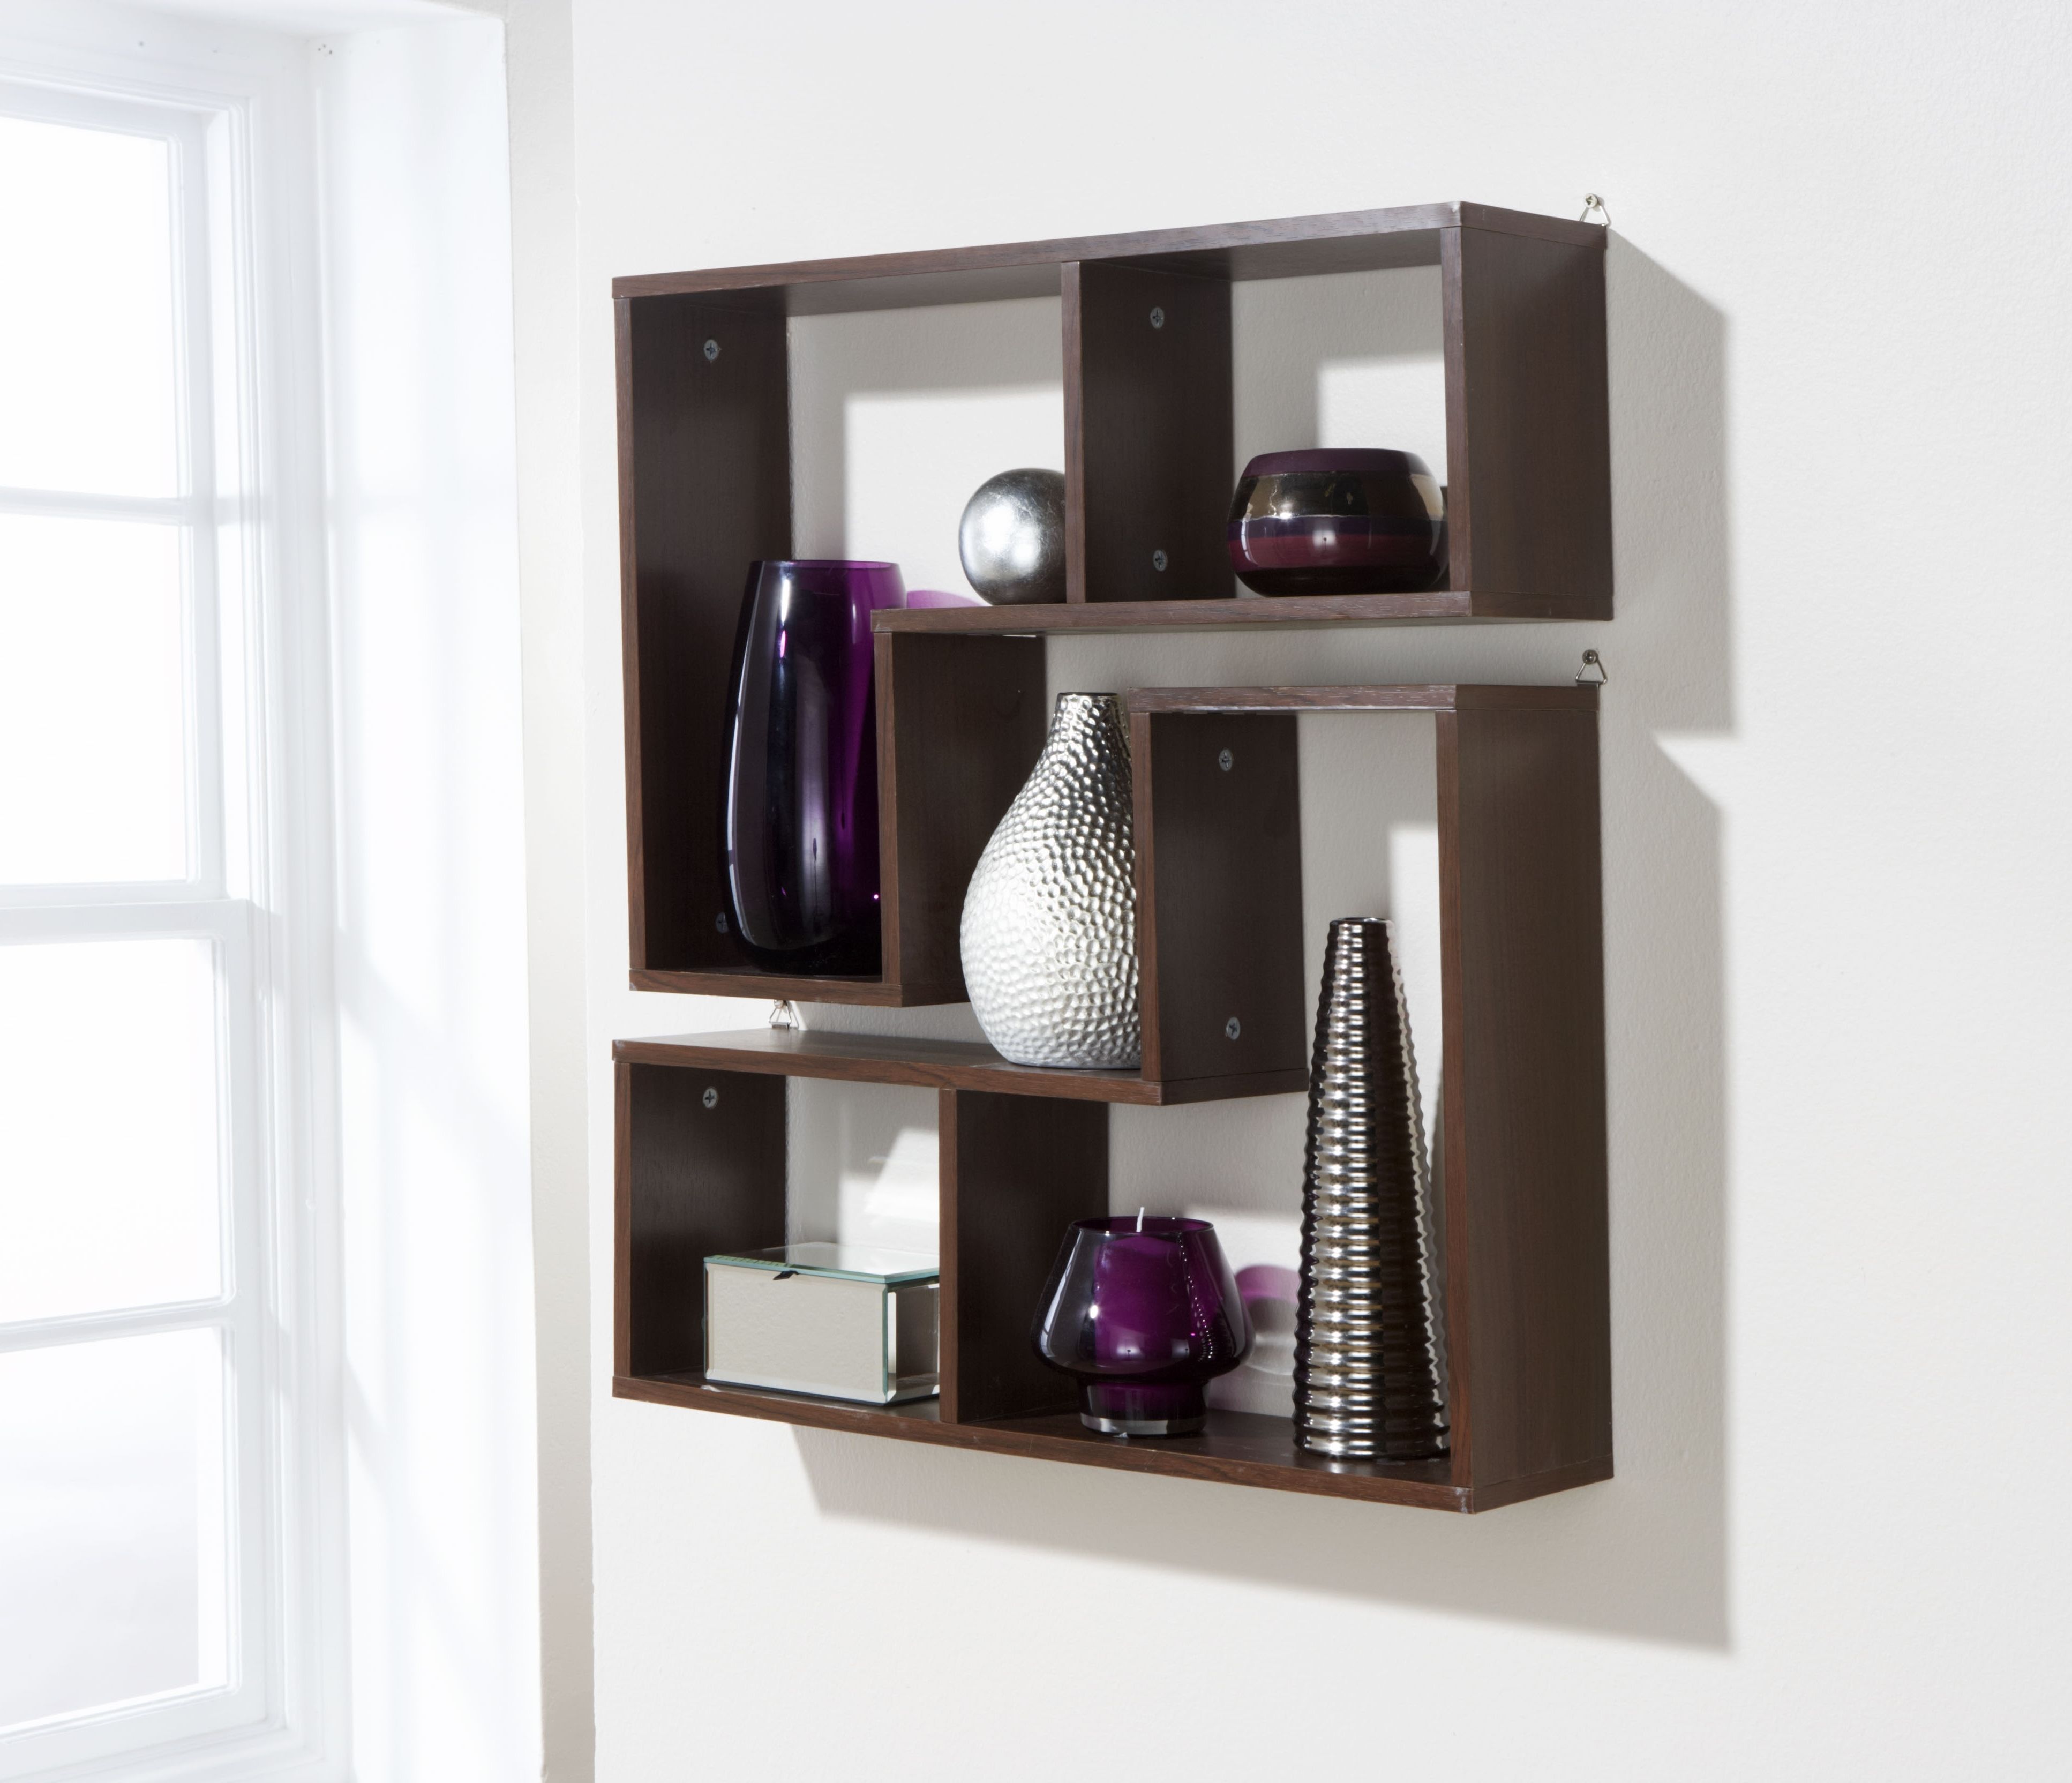 Widely Used Wall Shelving Units With Decorative Full Wall Shelving Units – Wall Units Design Ideas (View 10 of 15)